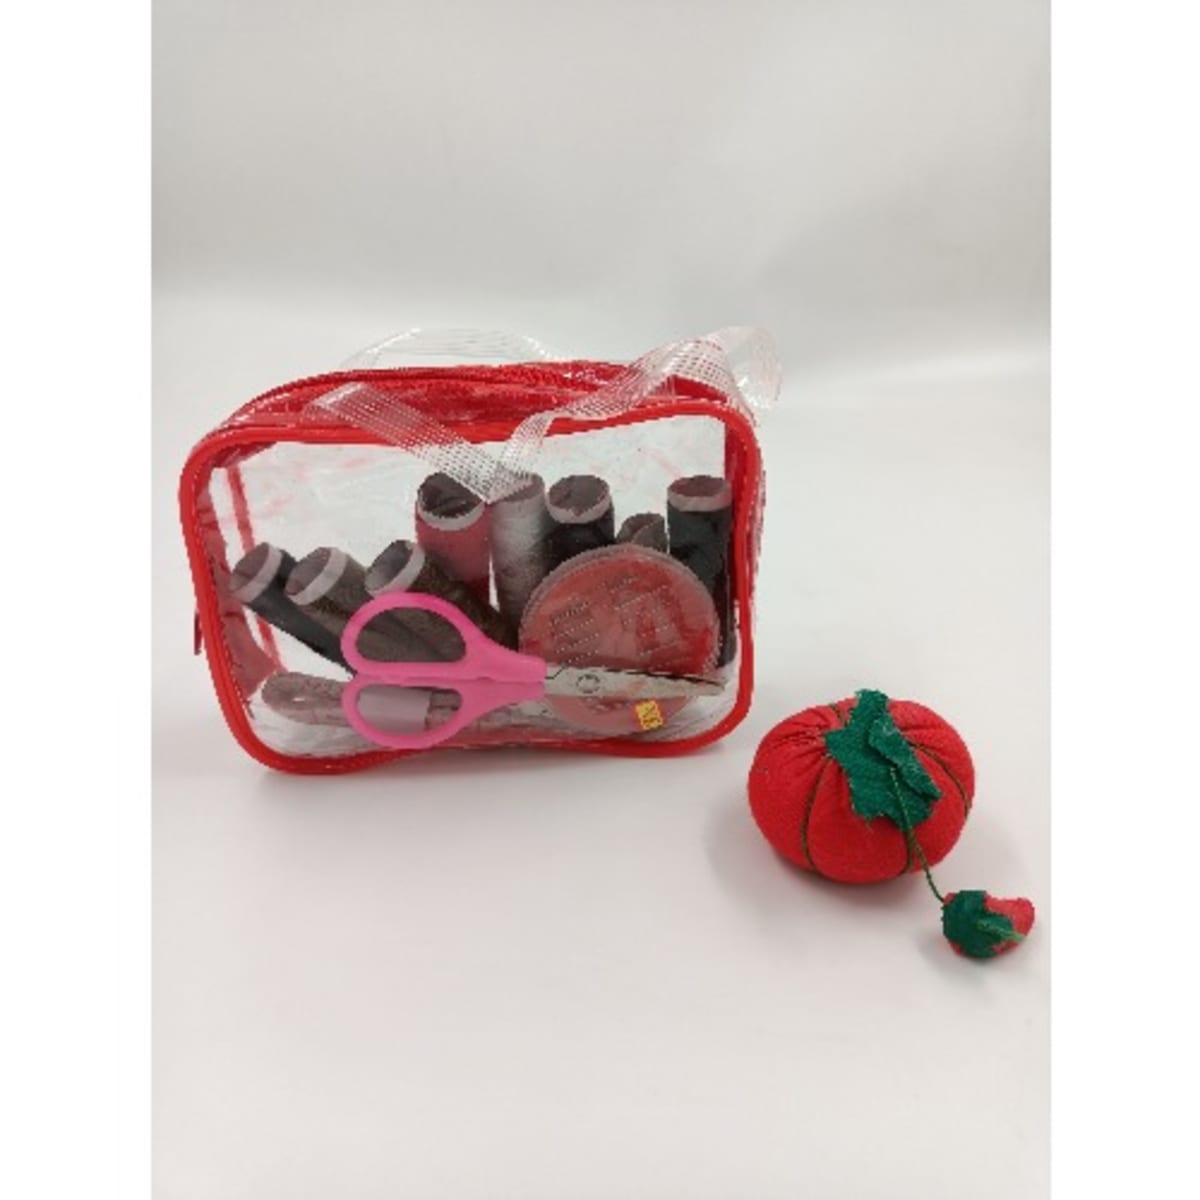 Beginner's Sewing Kit - Small Size